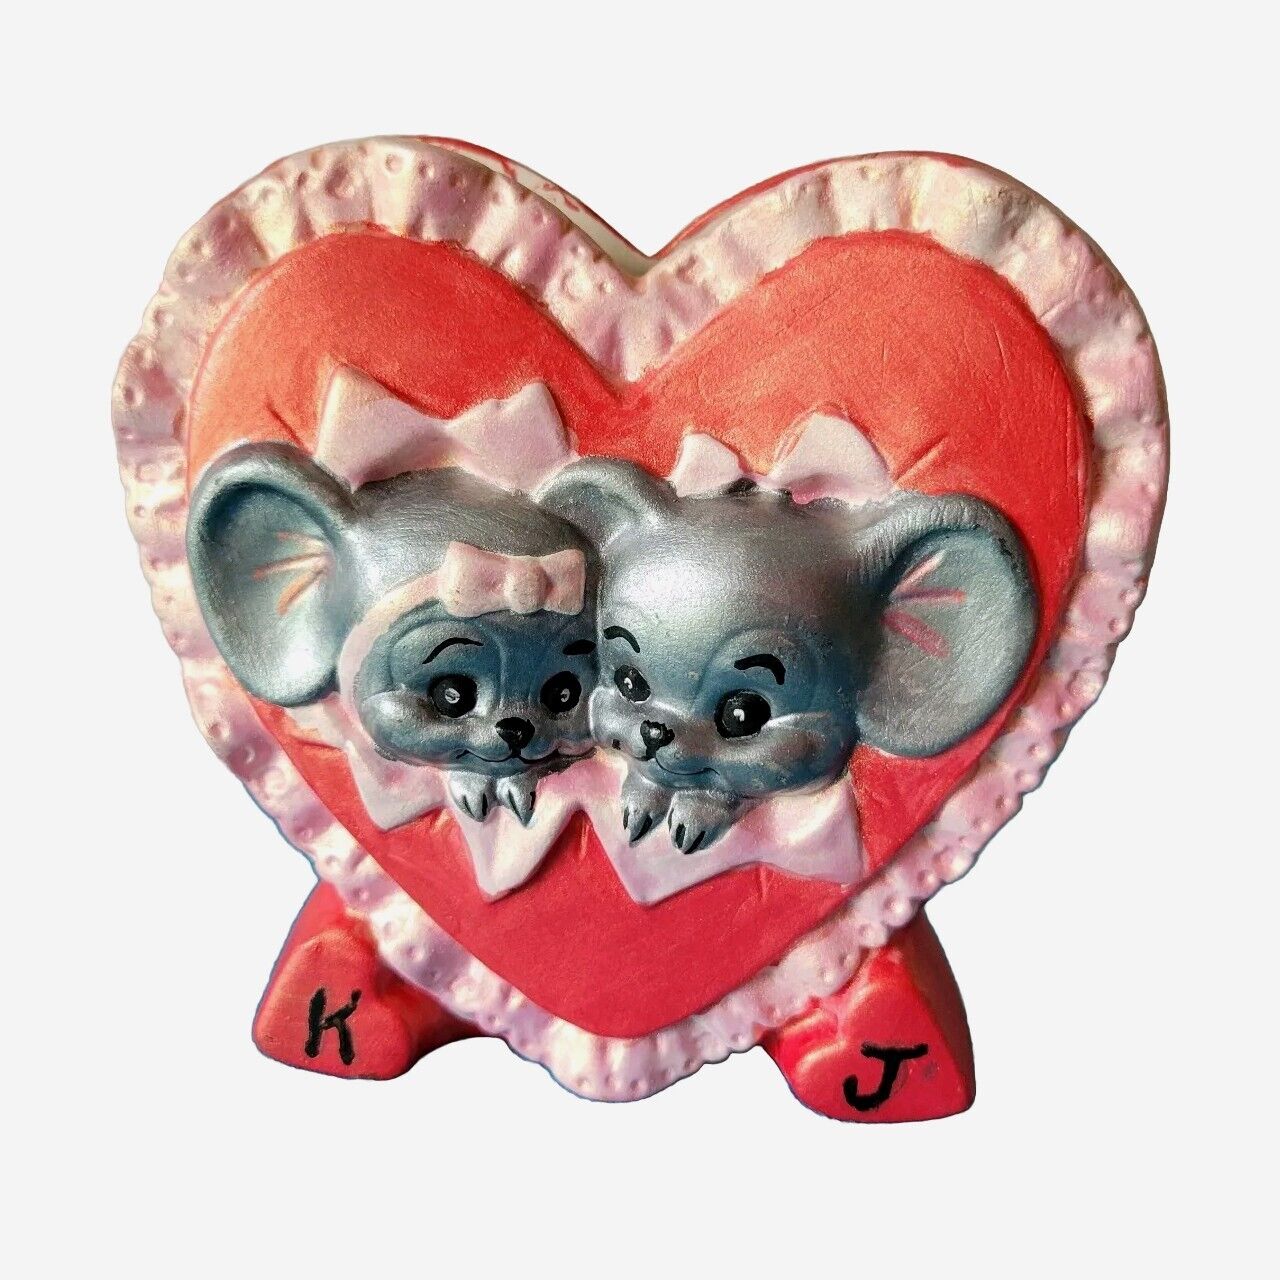 Vintage Heart Shaped Planter Mouse Pink Mice Mouse Ceramic Valentine\'s Day CUTE